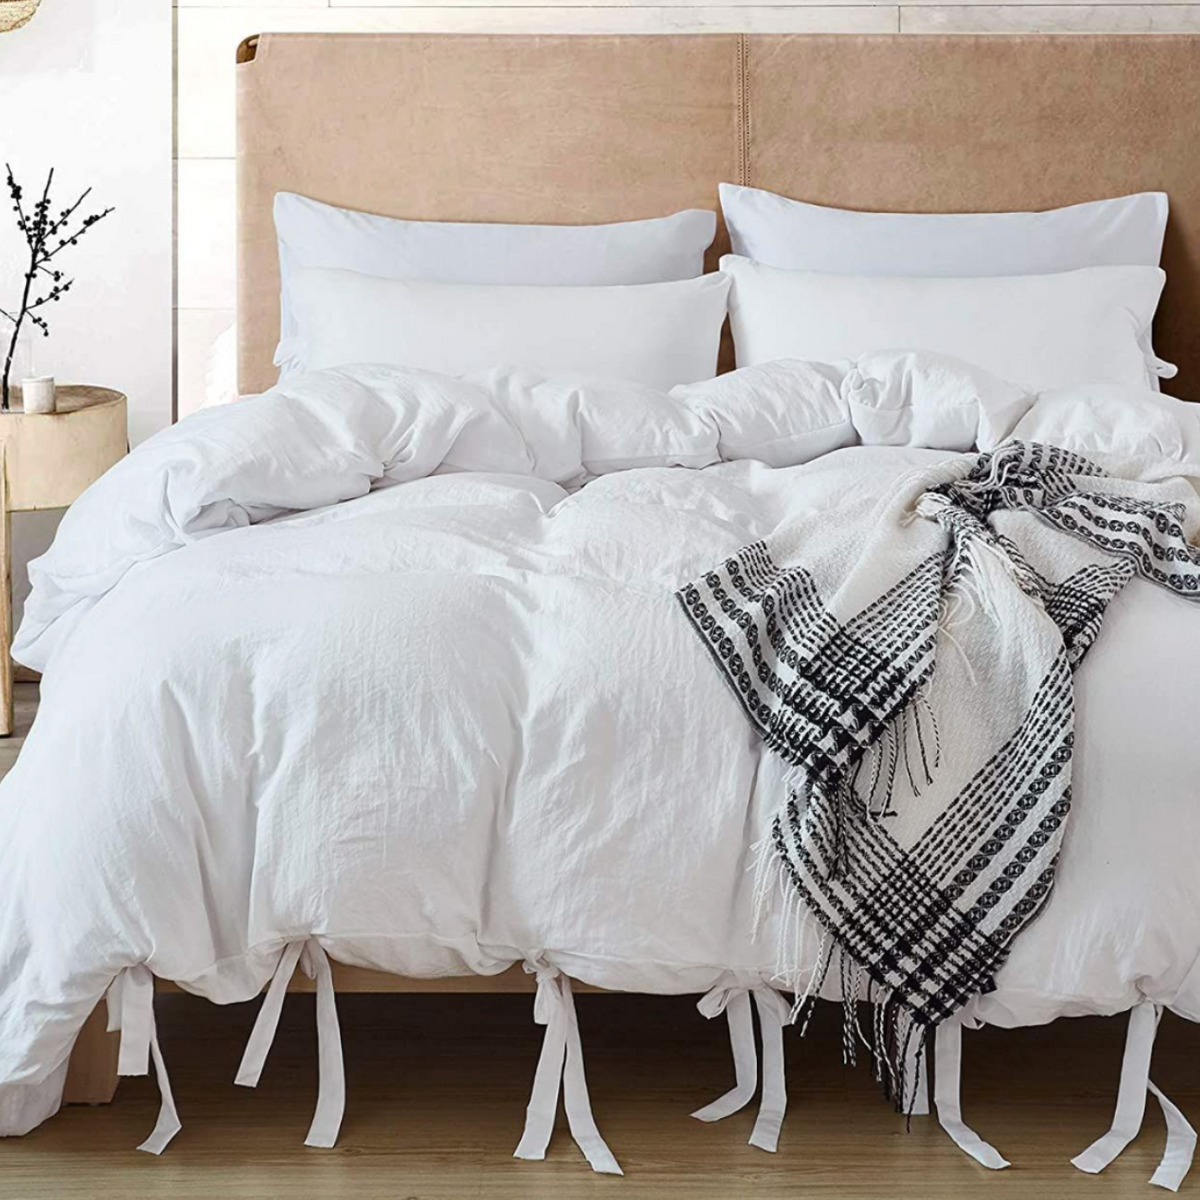 20 Best Duvet Covers 2022 The Strategist, How To Put On A Duvet Cover That Has Ties